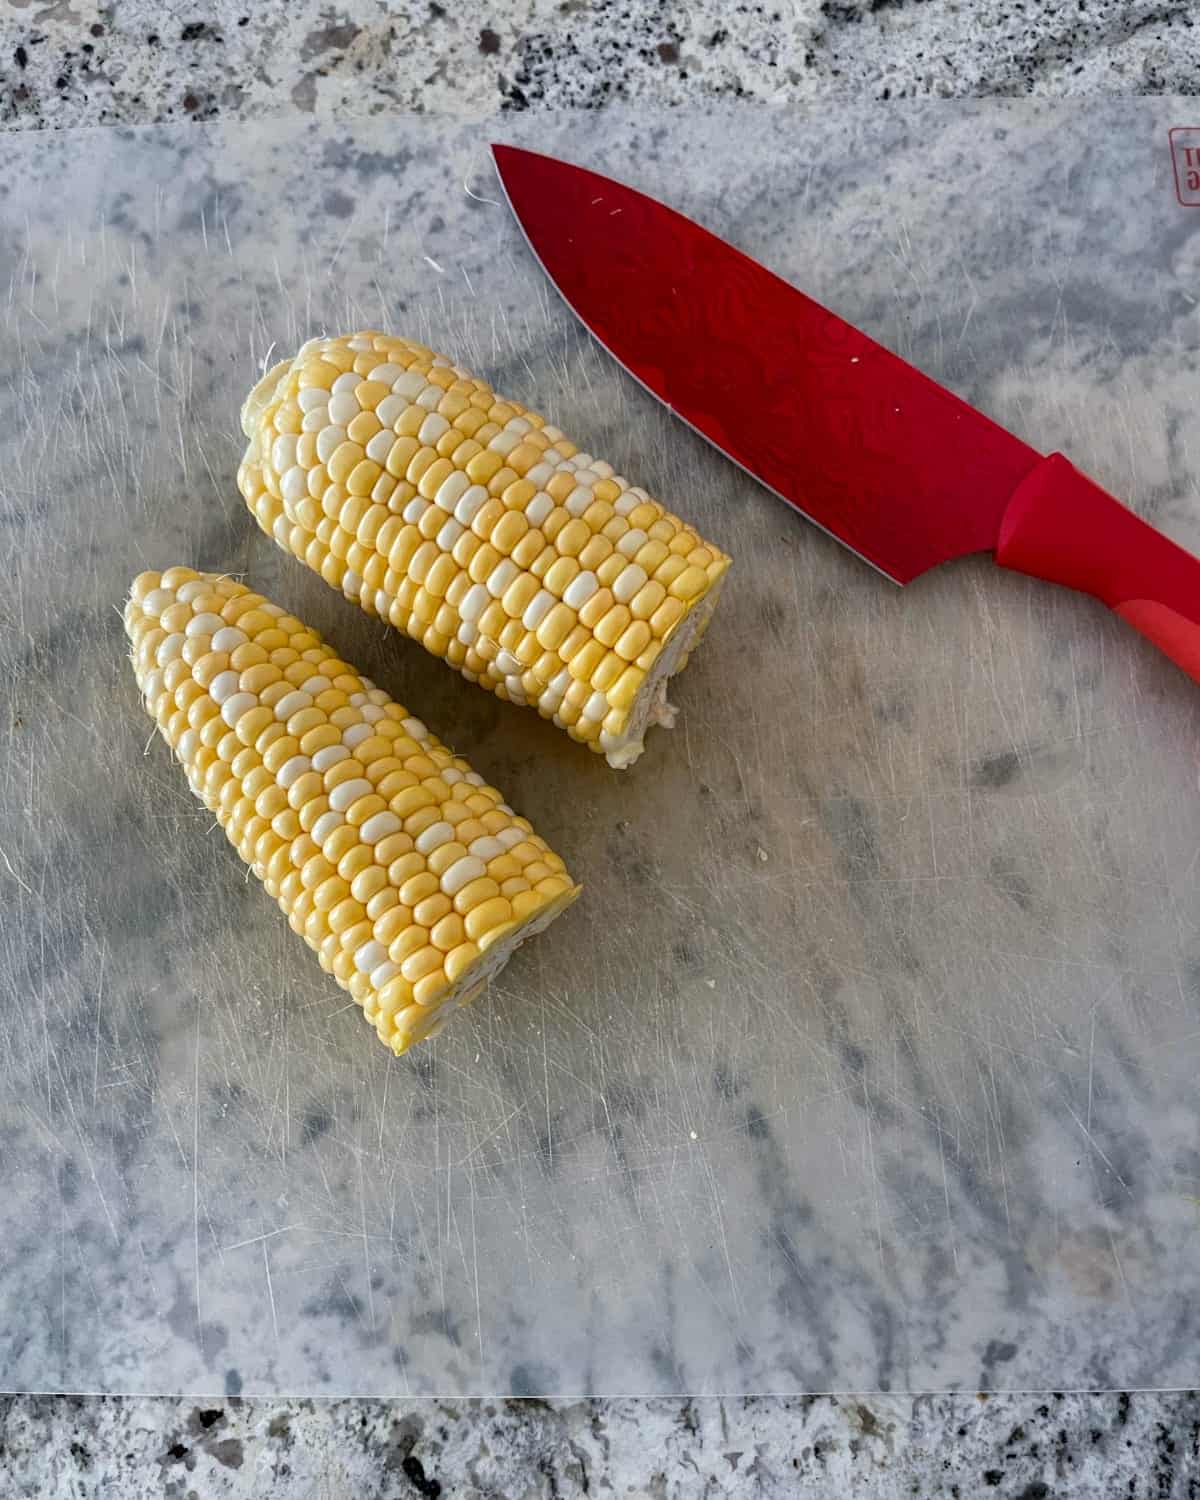 Corn cob cut in half with red knife.